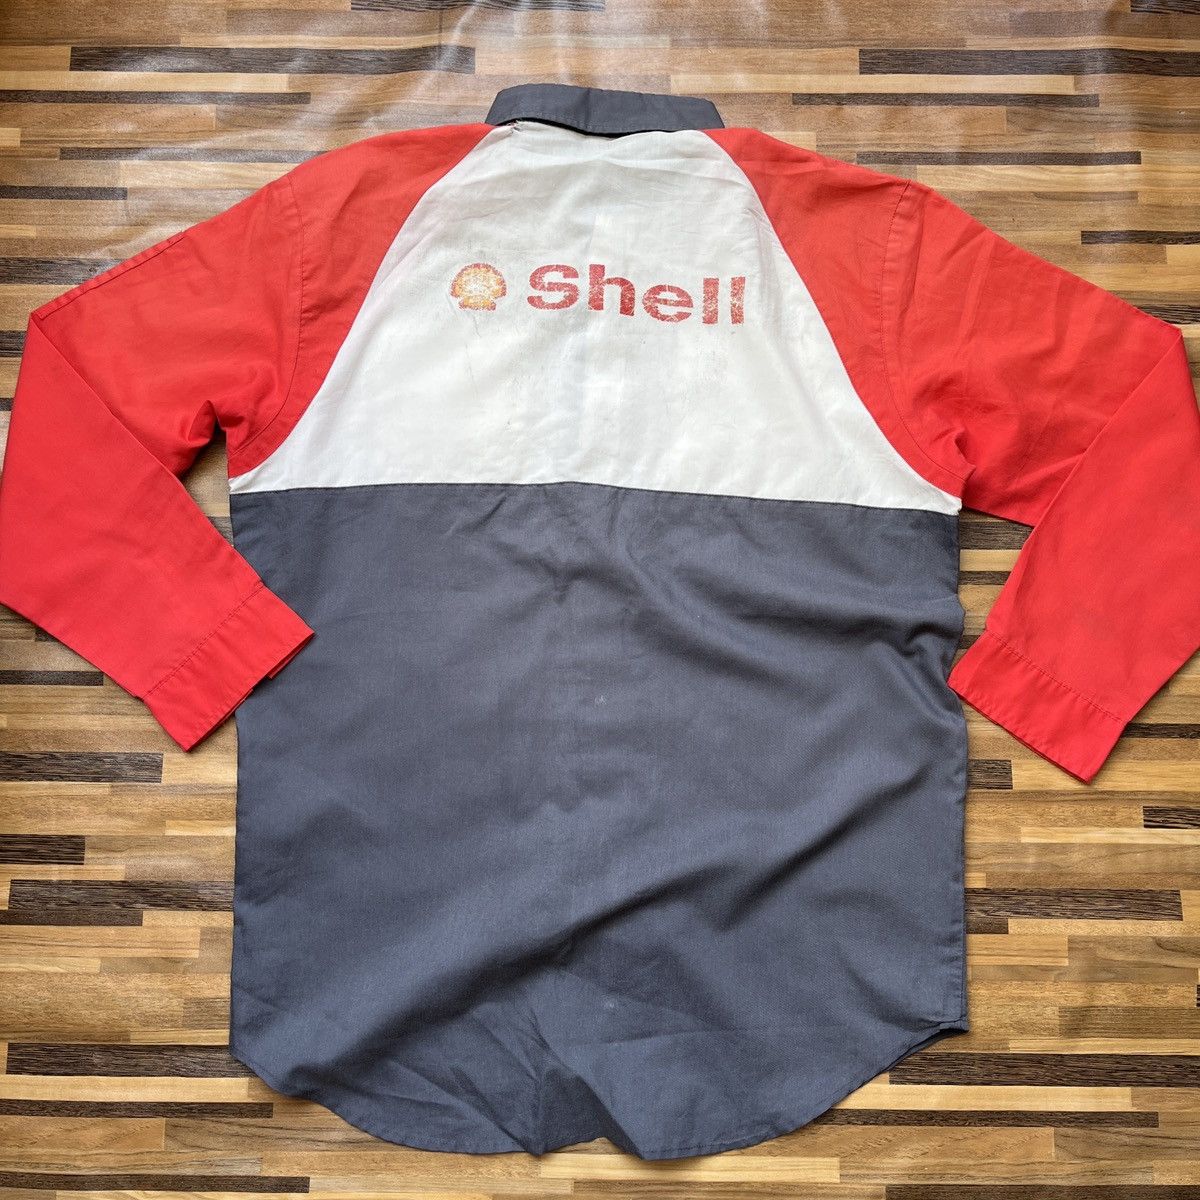 Shell Uniform Workers Vintage Japanese Outlet 1990s - 15